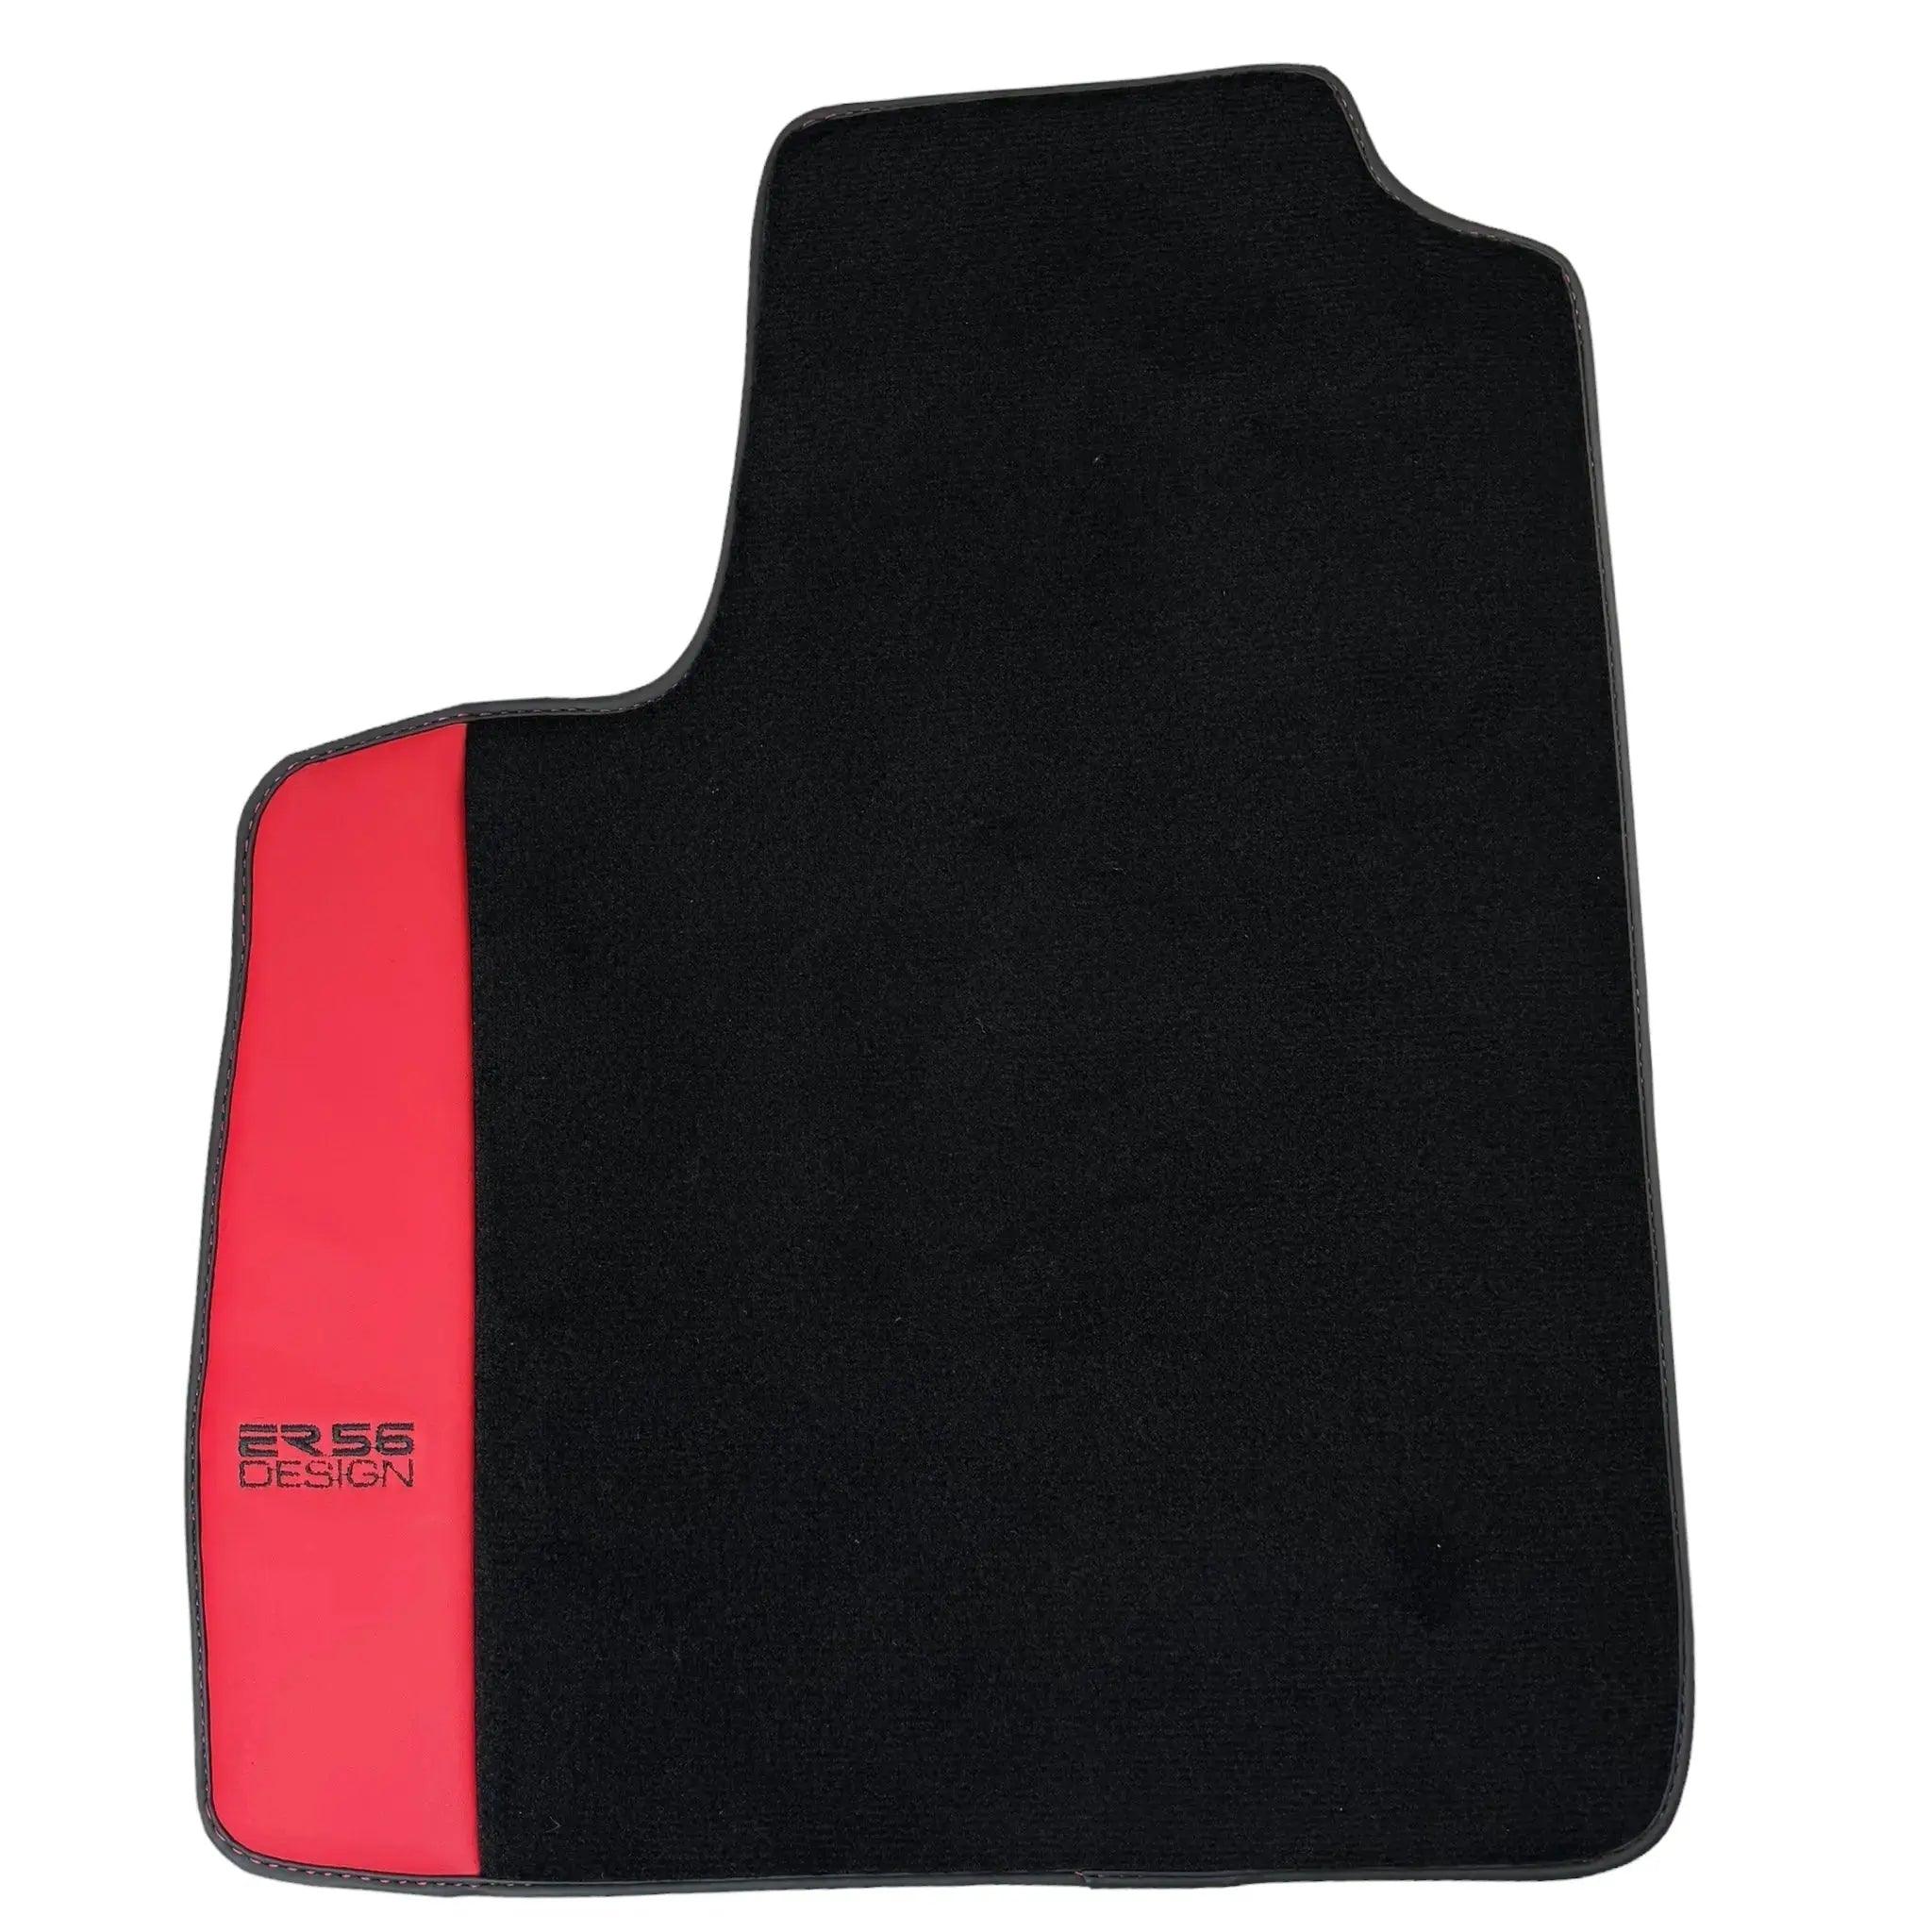 Black Floor Mats for Bentley Continental GTC (2006–2011) with Red Leather | ER56 Design - AutoWin